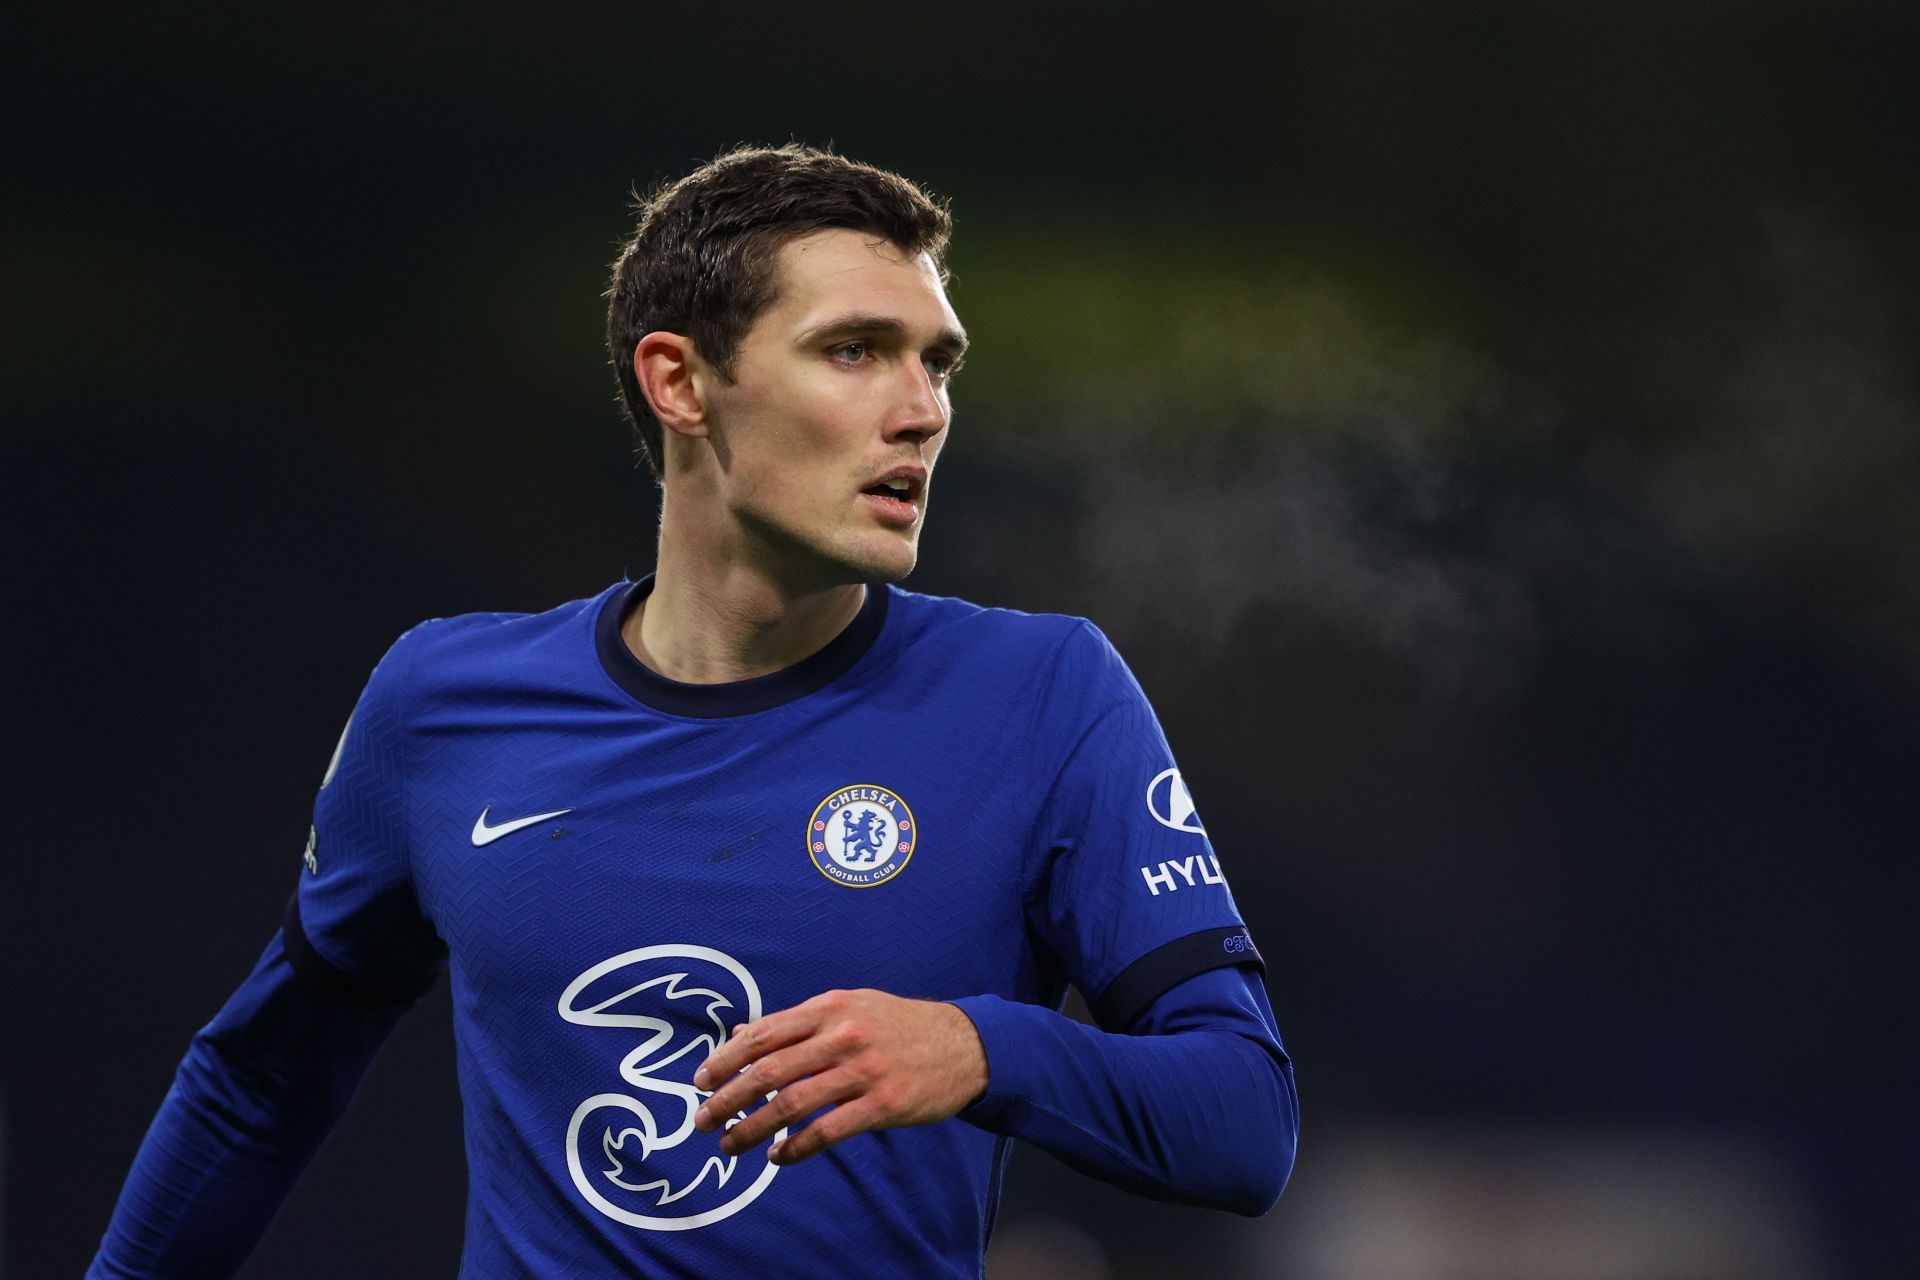 Andreas Christensen has taken his game to a new height this season.